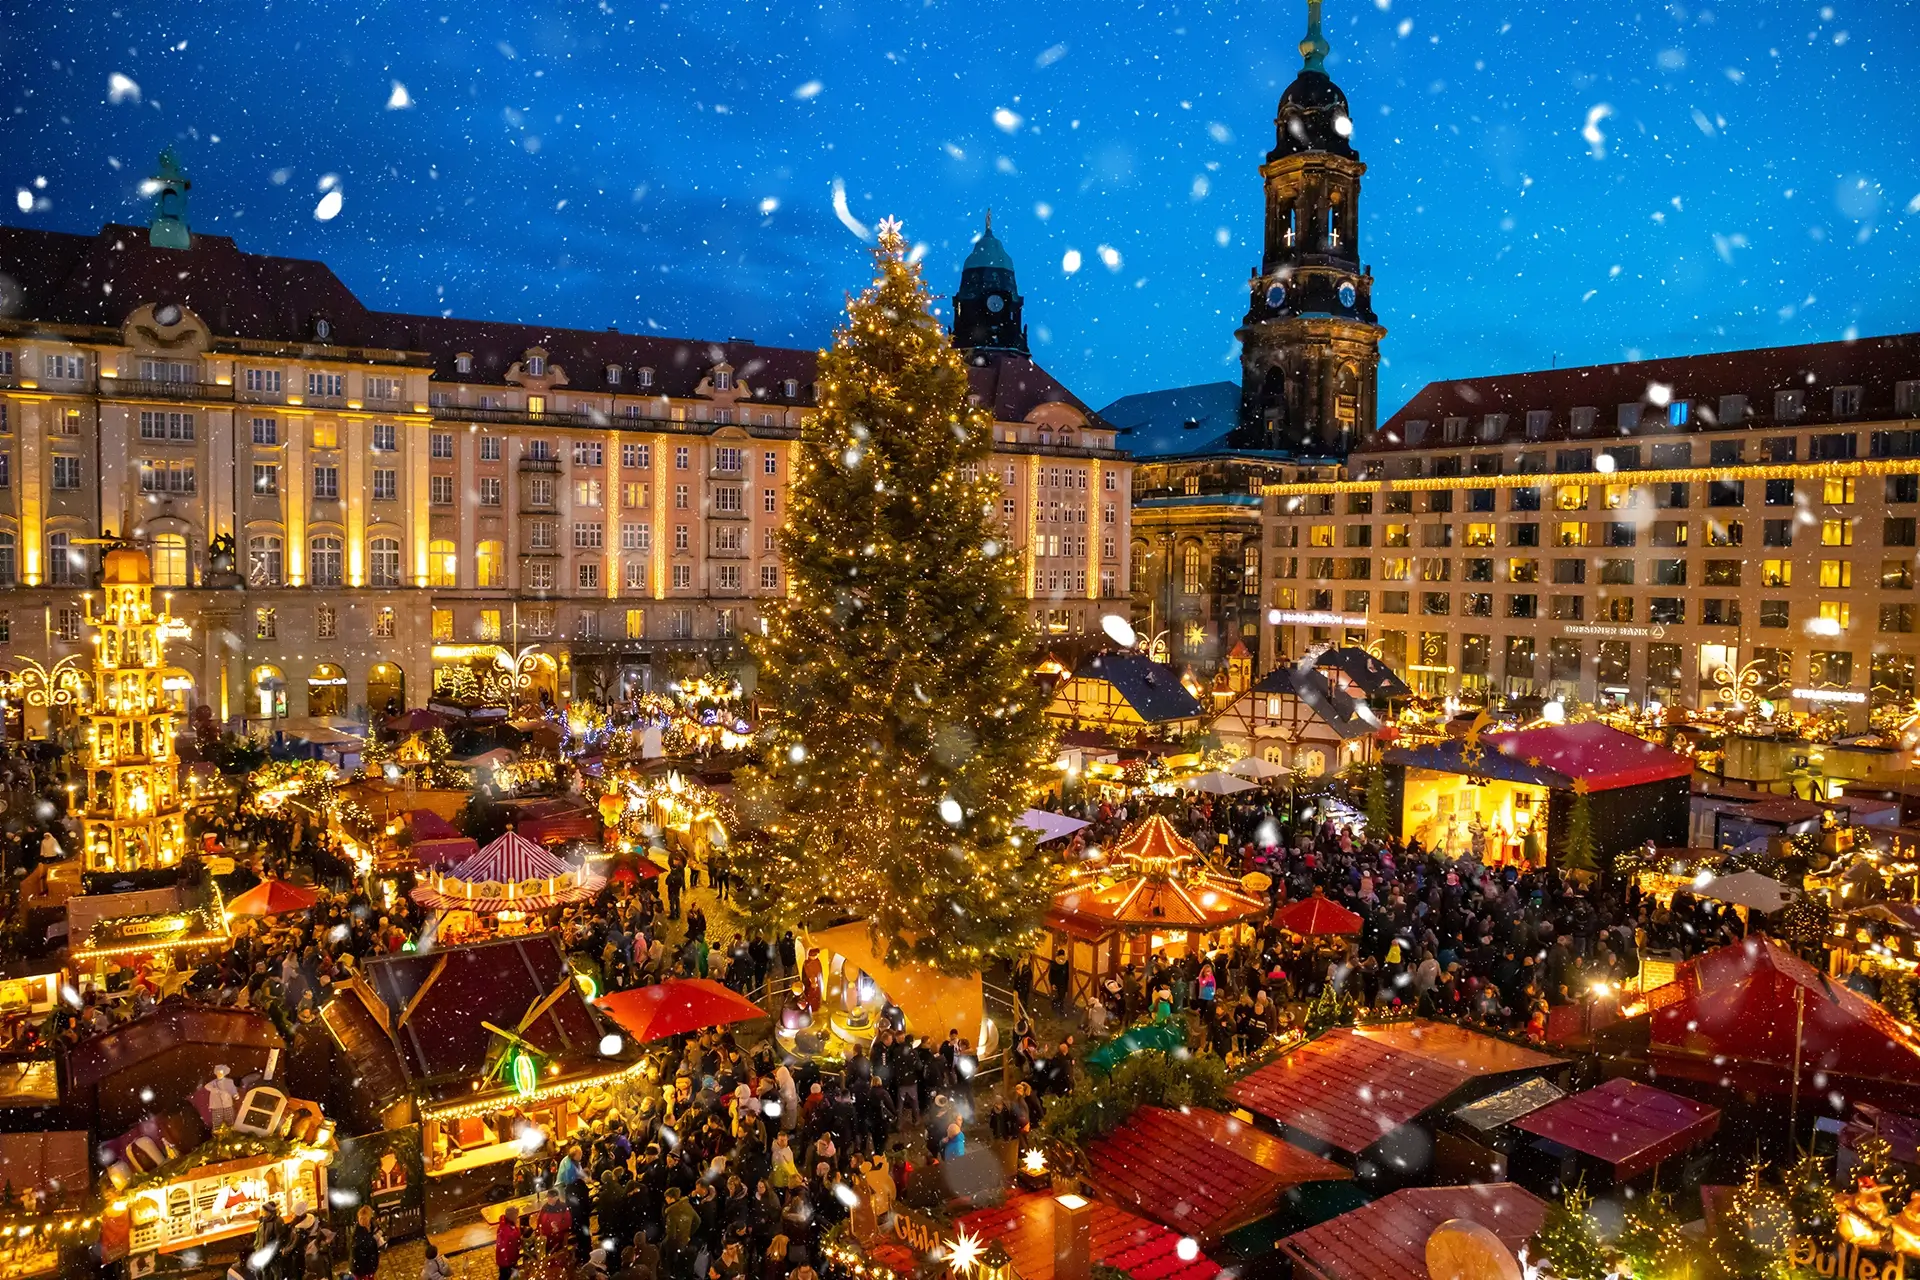 » Country Heritage Tours » Country Heritage Tours European Christmas market with snow falling at night